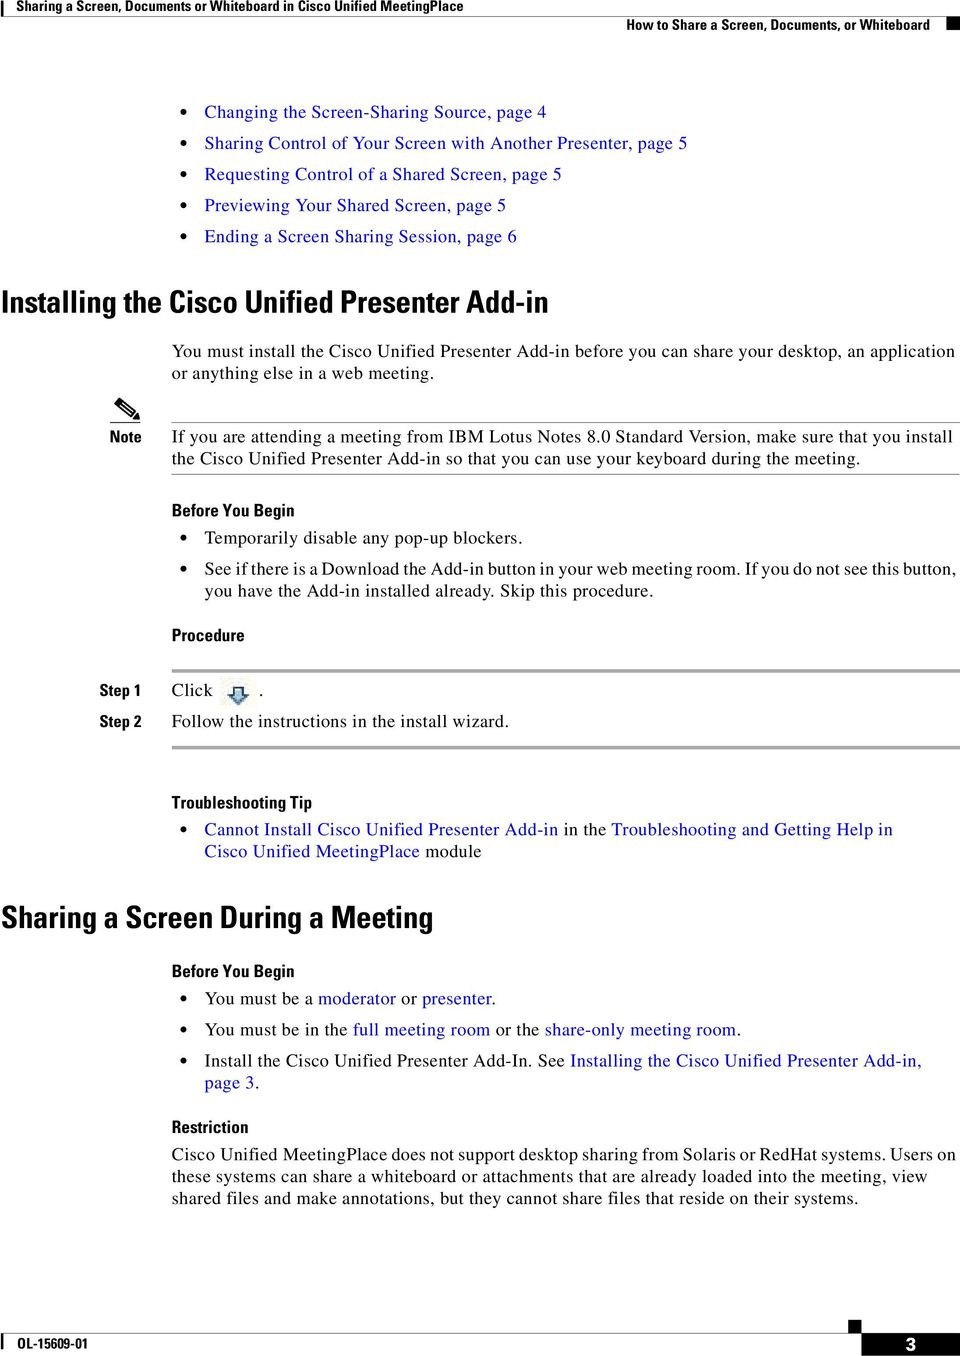 must install the Cisco Unified Presenter Add-in before you can share your desktop, an application or anything else in a web meeting. Note If you are attending a meeting from IBM Lotus Notes 8.